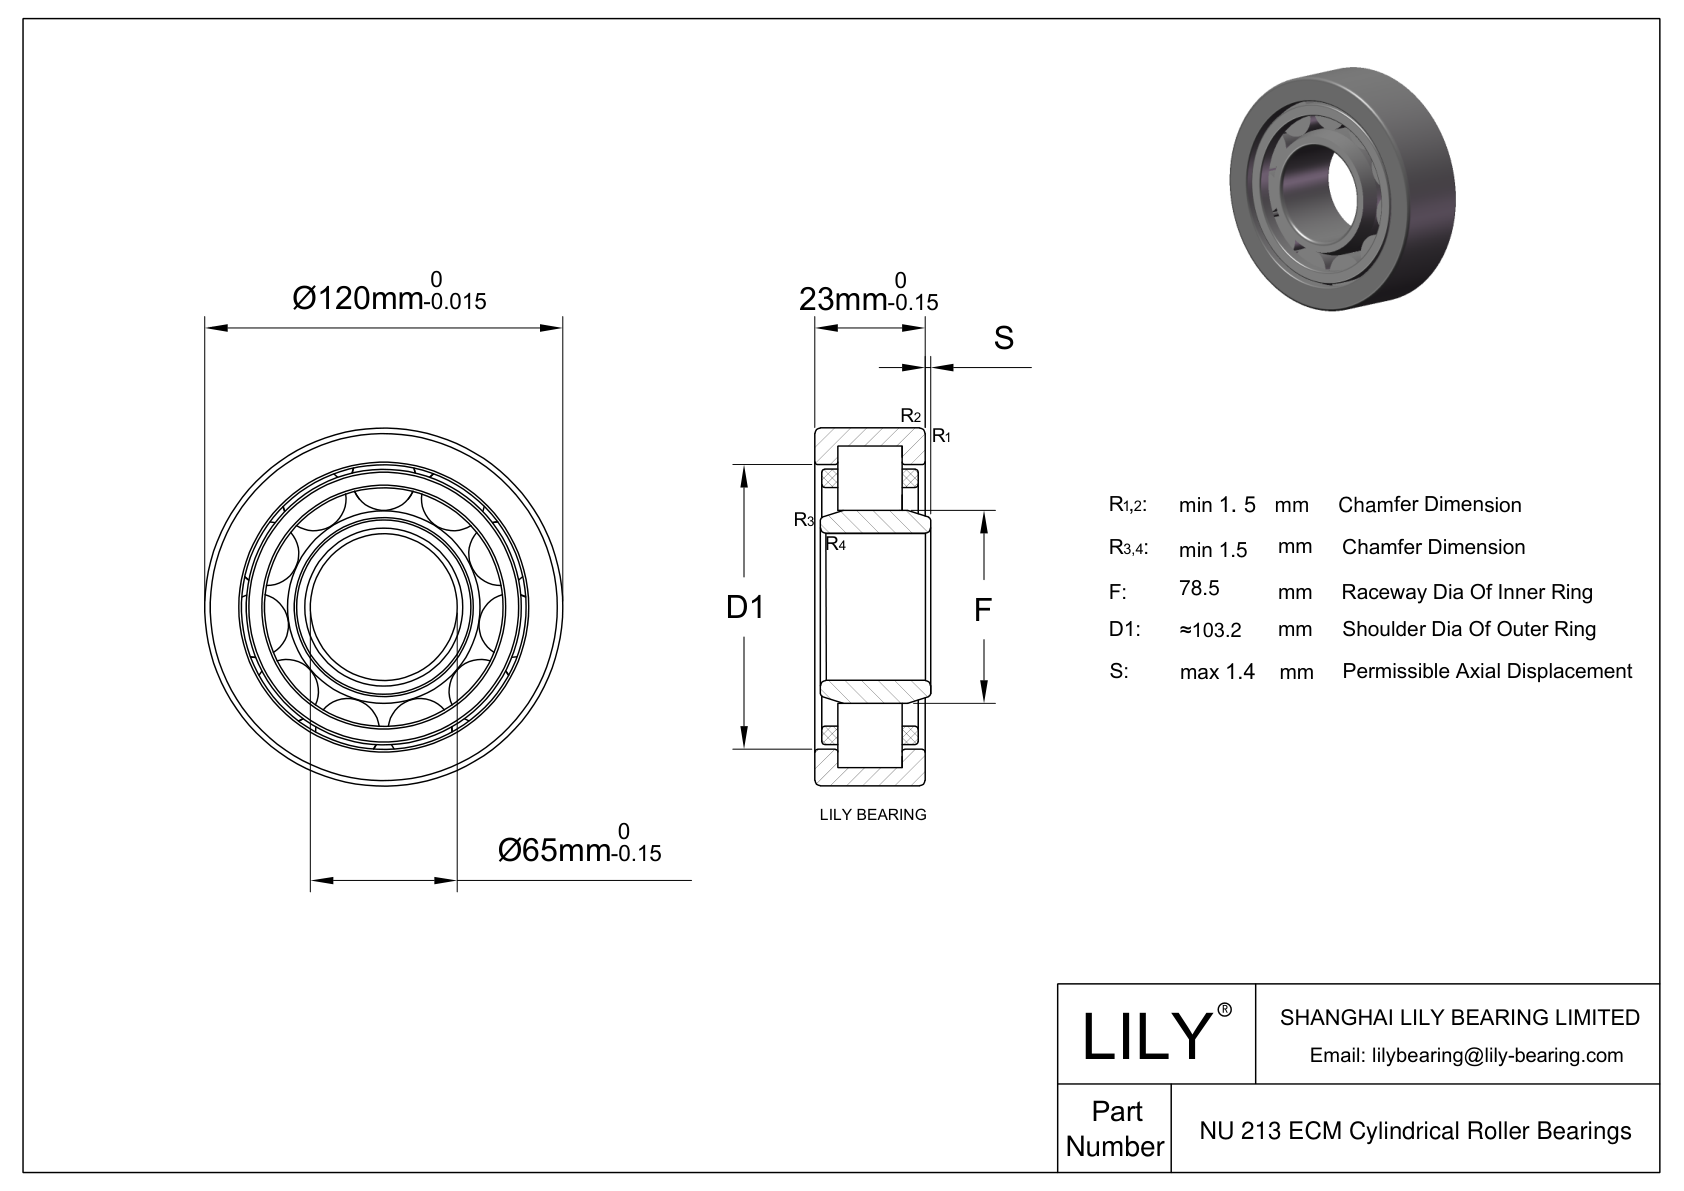 NU 213 ECM/C3VL0241 Ceramic Coated Cylindrical Roller Bearings cad drawing